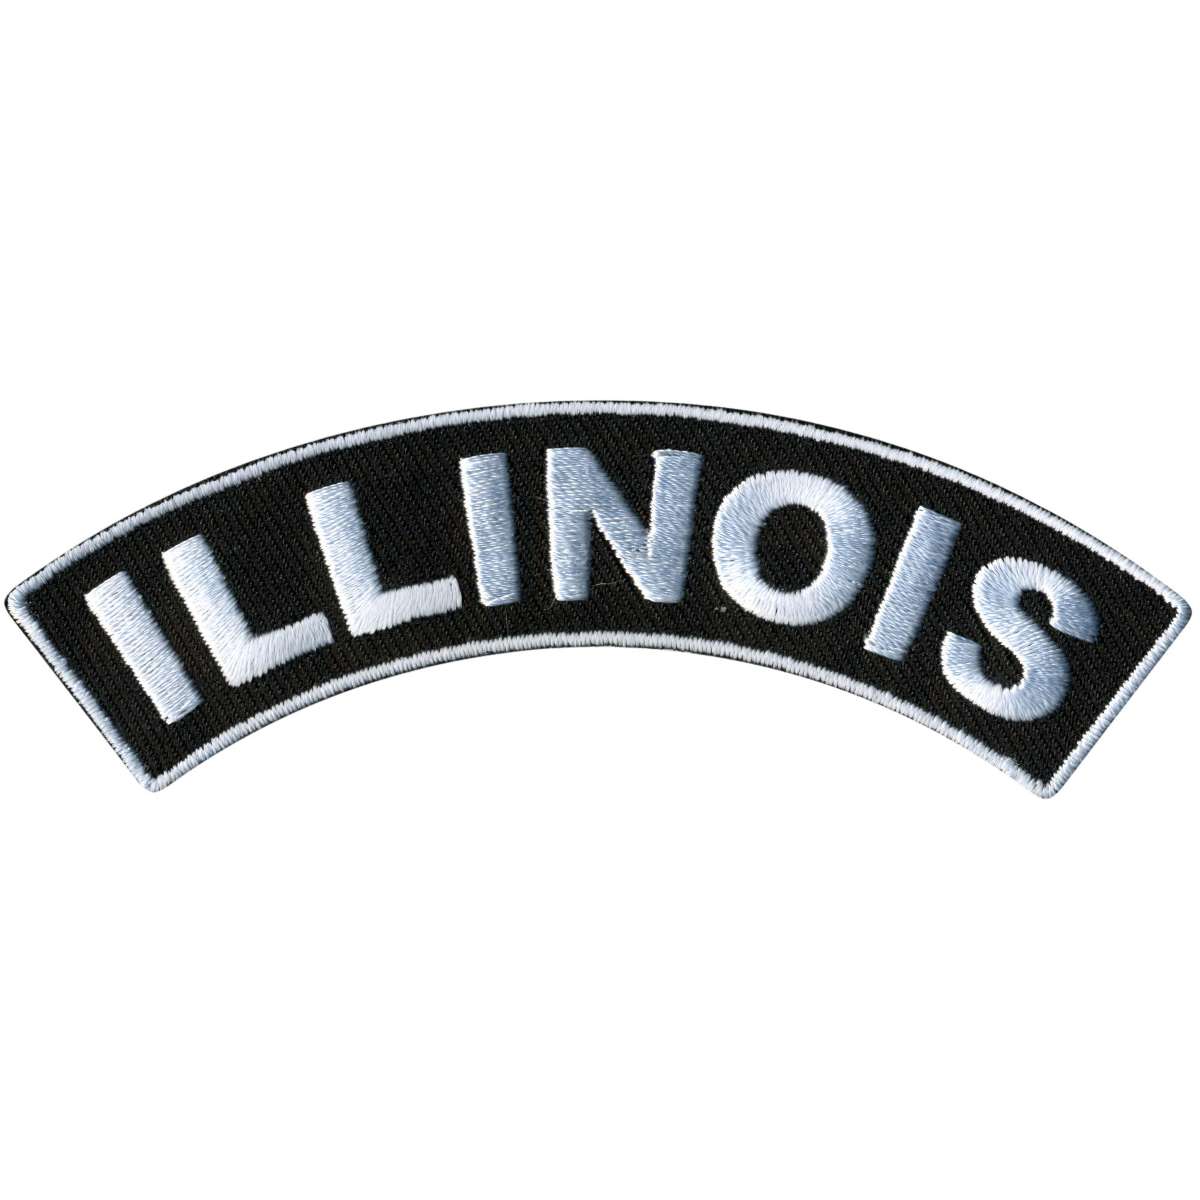 Hot Leathers Illinois 4” X 1” Top Rocker Patch PPM4026